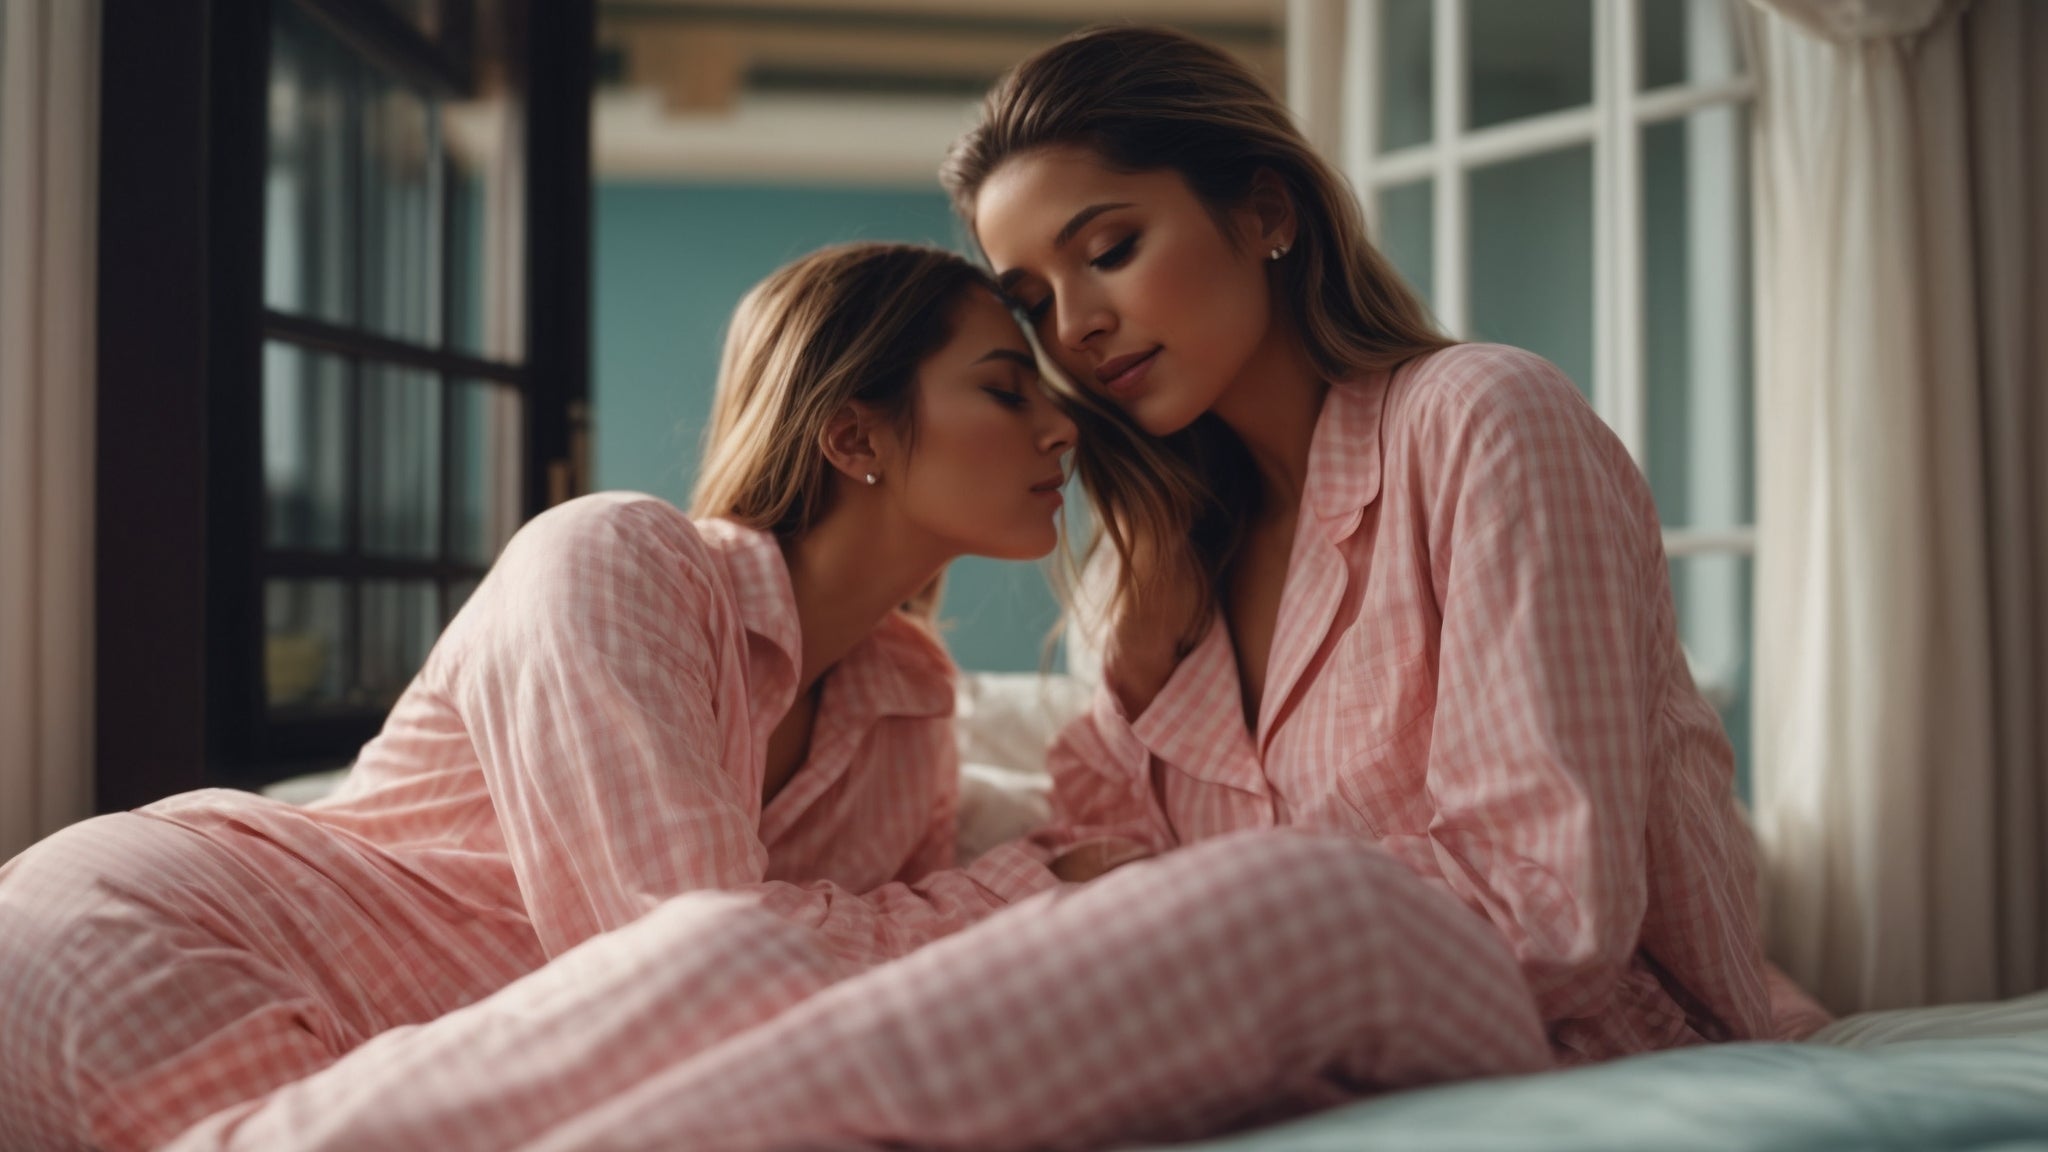 Two women sitting on the bed in pink pajamas